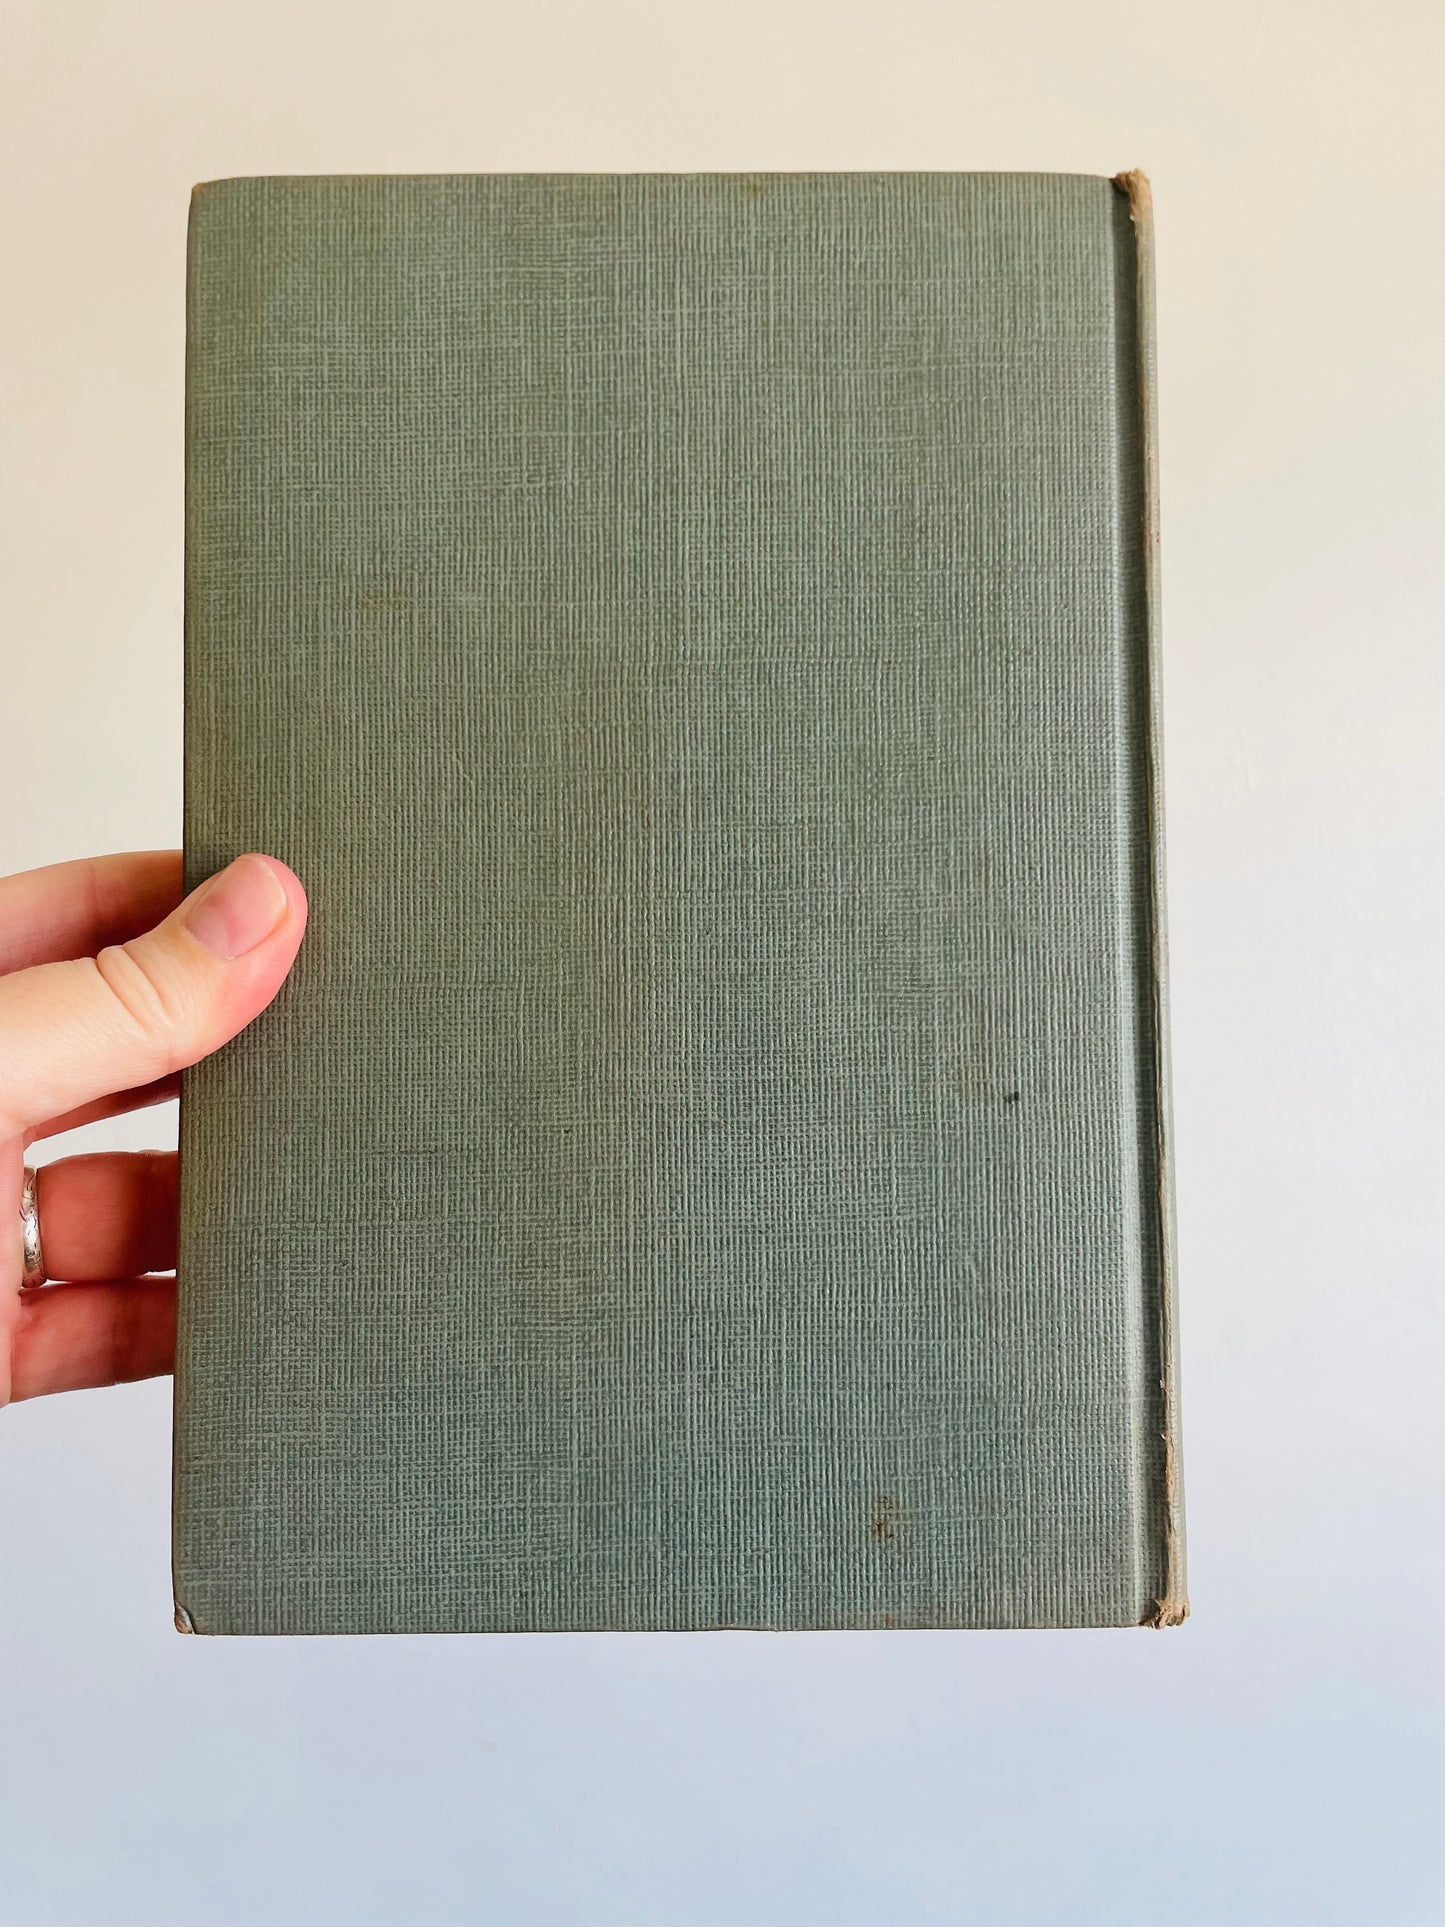 The Black Rose - Thomas B. Costain Hardcover Book (1947)